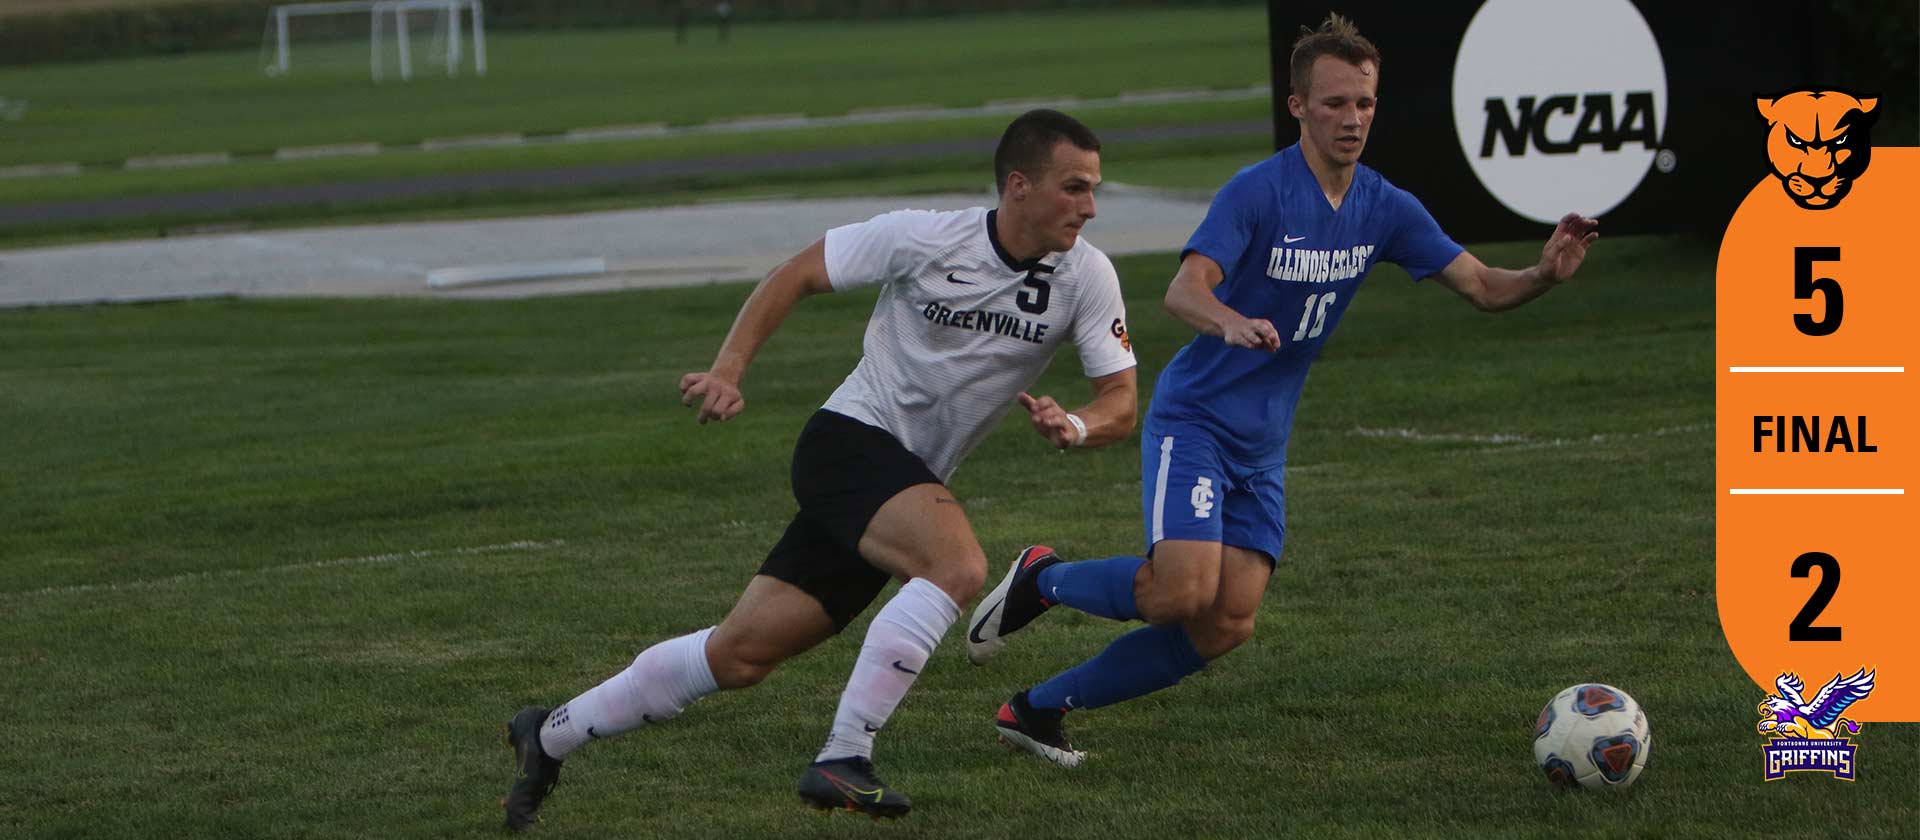 Men's soccer stays undefeated in SLIAC with 5-2 win at Fontbonne